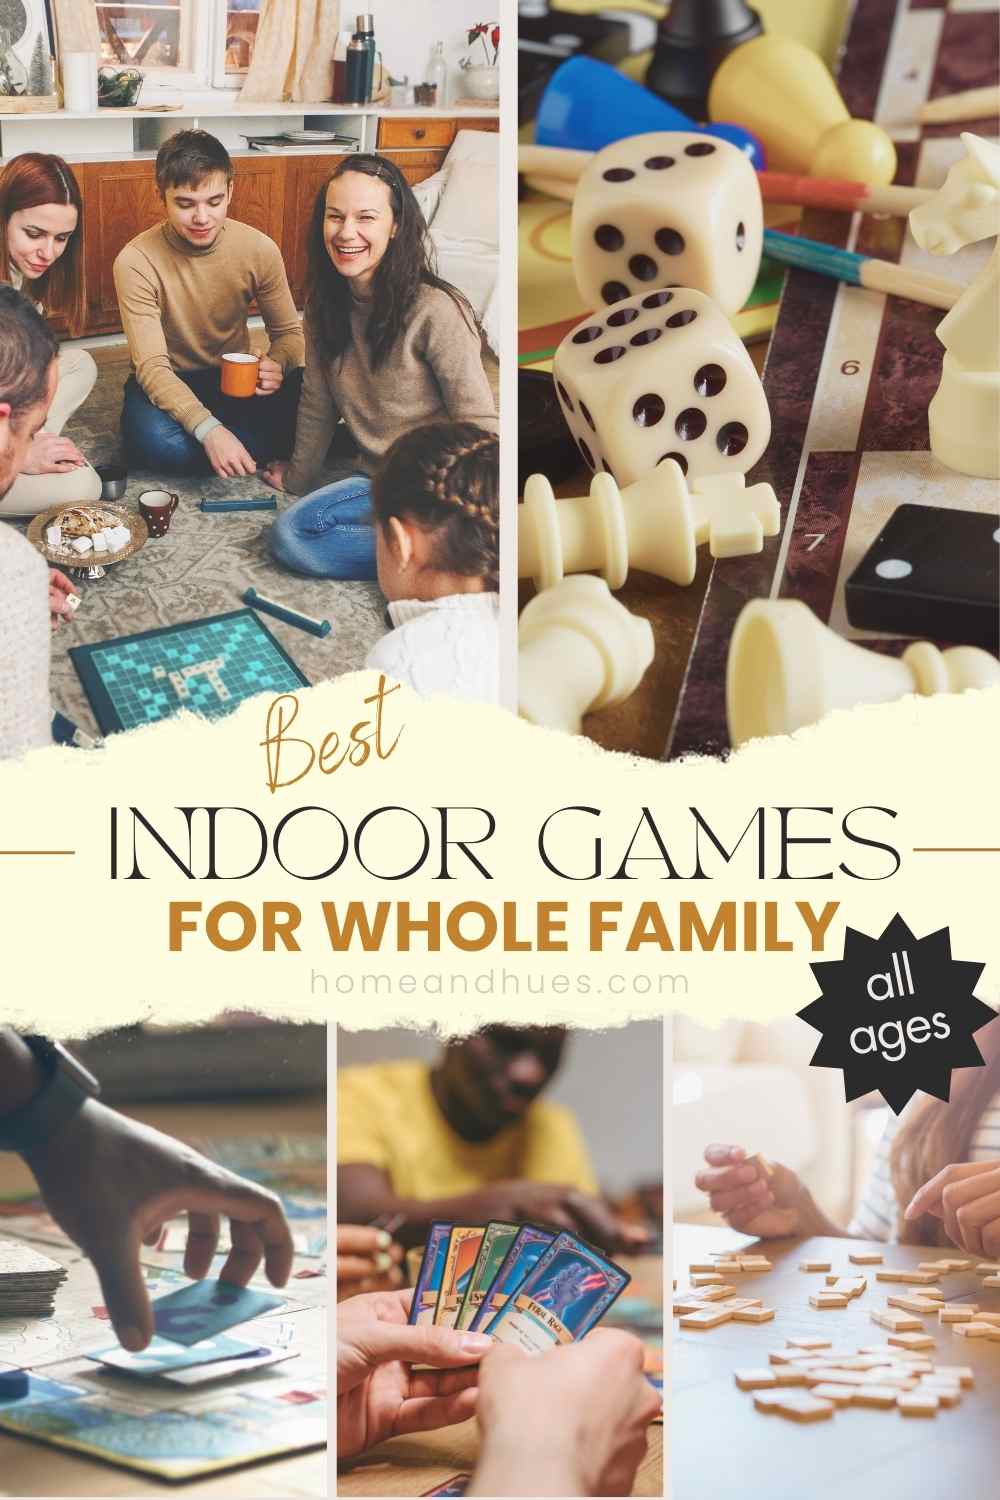 Looking for indoor family activities or Fun Indoor Games For the whole family to spend the day together during cold winter season? Check out this list of fun entertaining indoor games suitable for Kids, Teens, Adults. From classic board games, card games, word games, quiz games to creative challenges and active entertainment. Including educational indoor games that involve problem-solving and enhancing vocabulary and math skills.